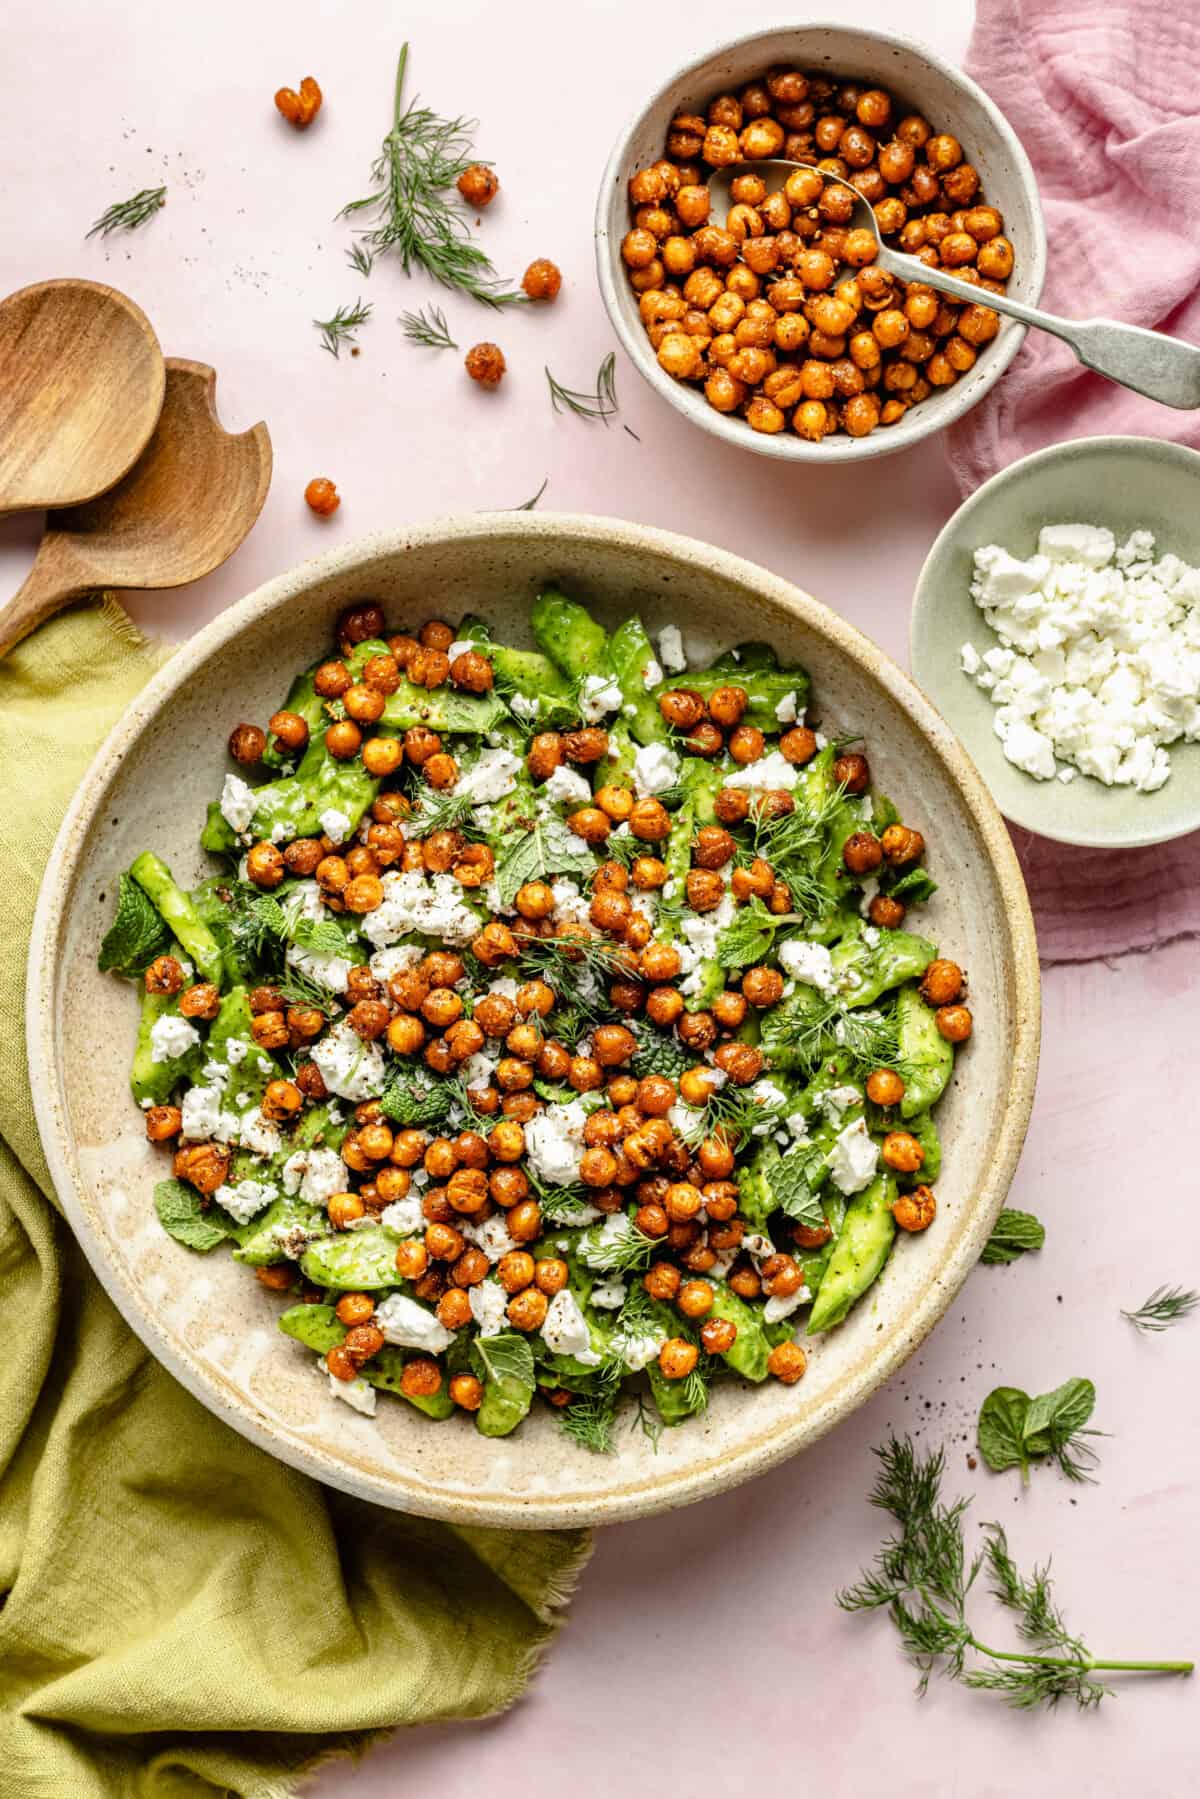 Salad in large bowl with feta and chickpeas scattered around.